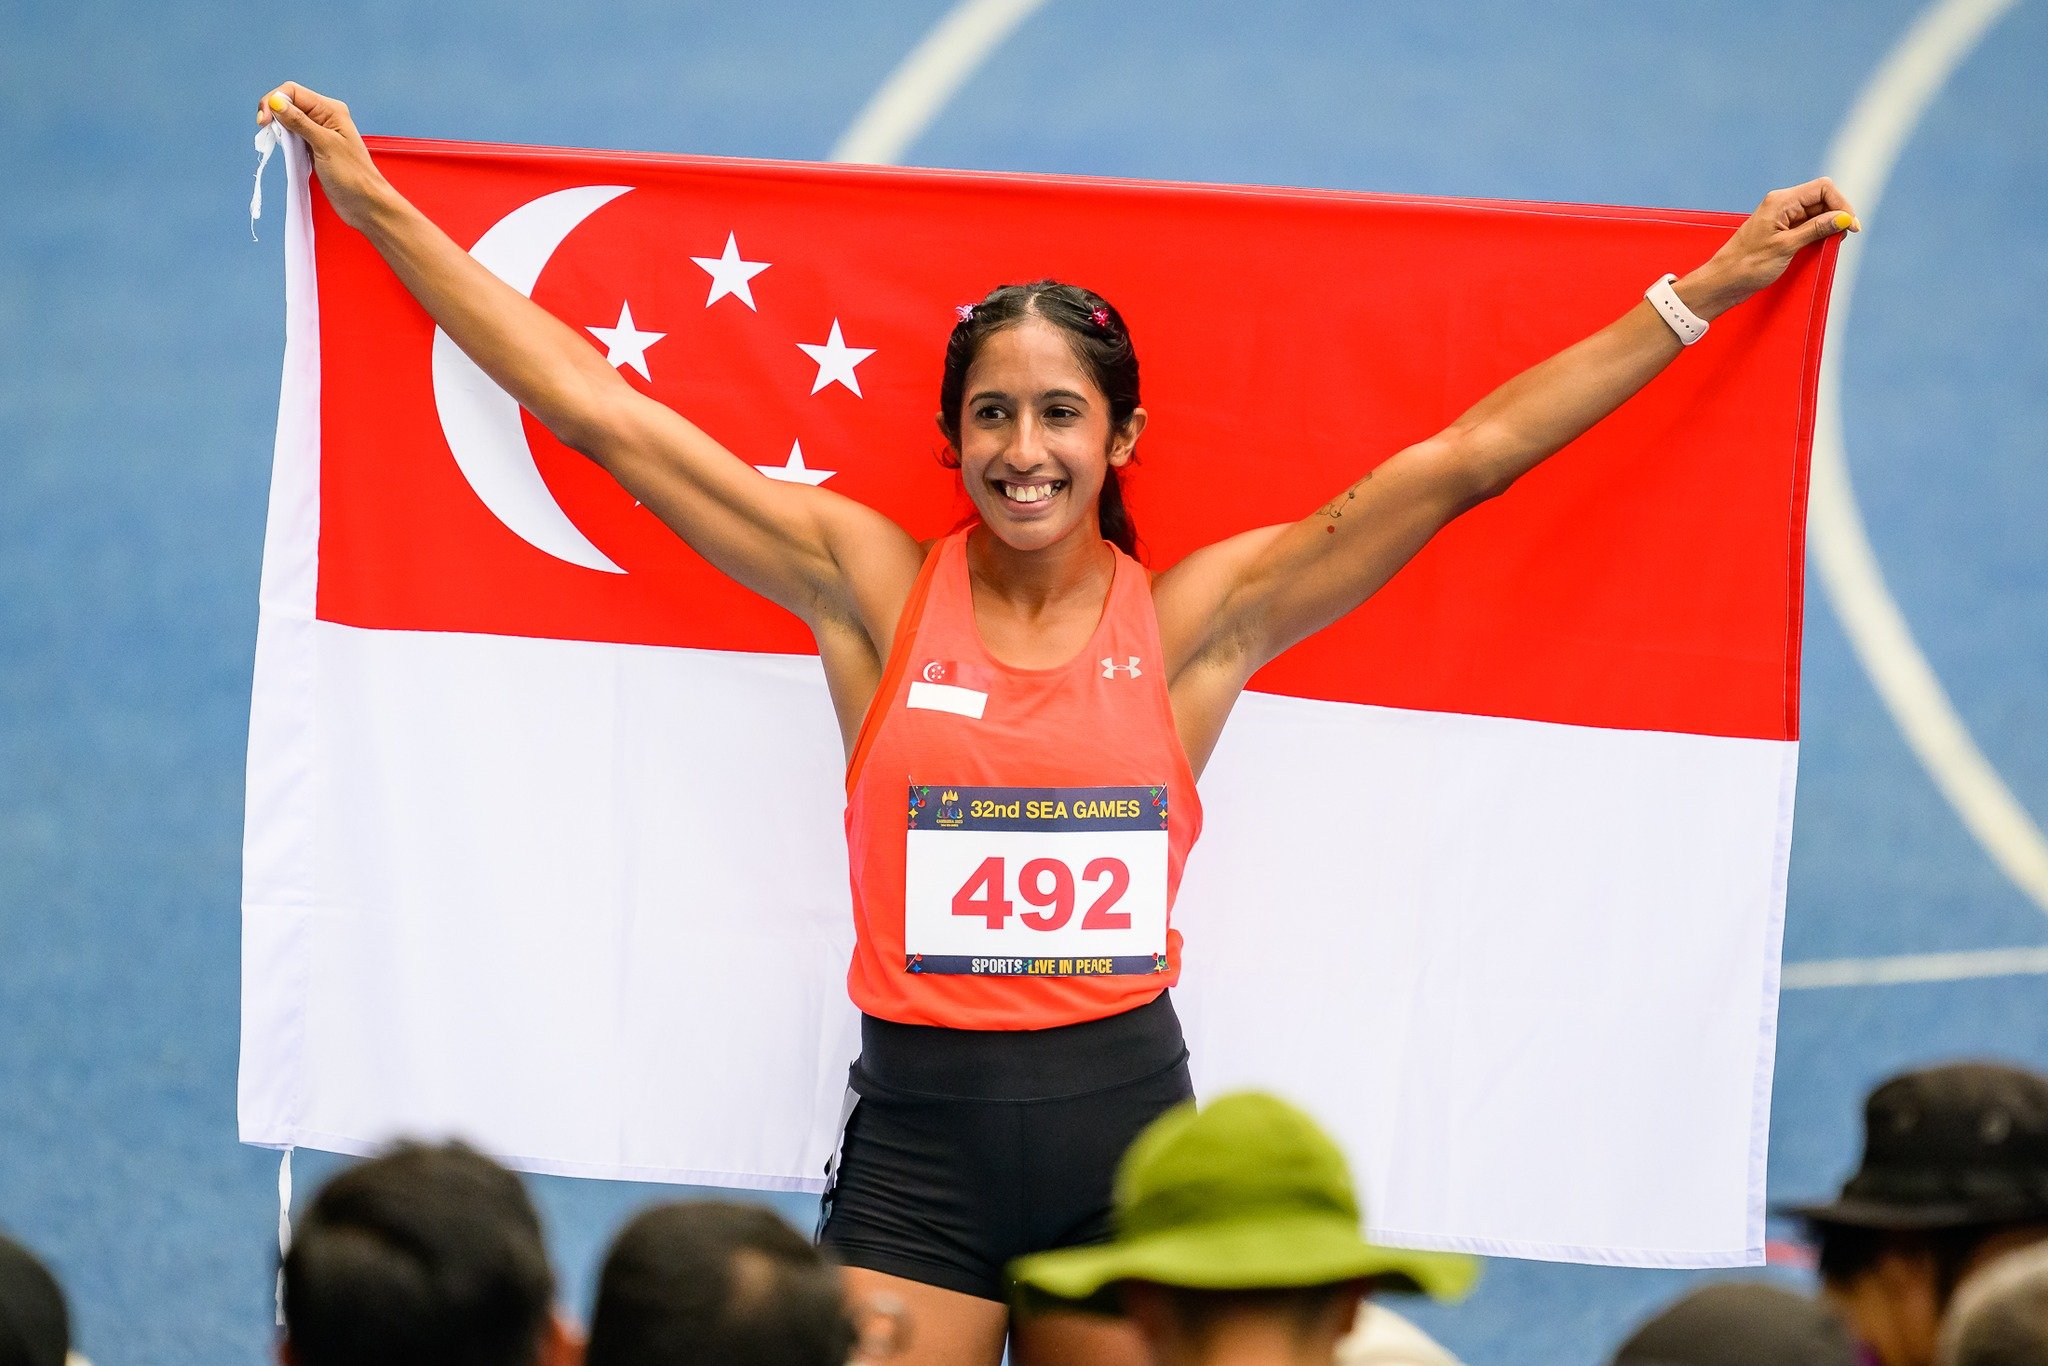 Shanti Pereira Makes History: Advances to World Championships 200m Semi-Finals with National Record-Breaking Performance